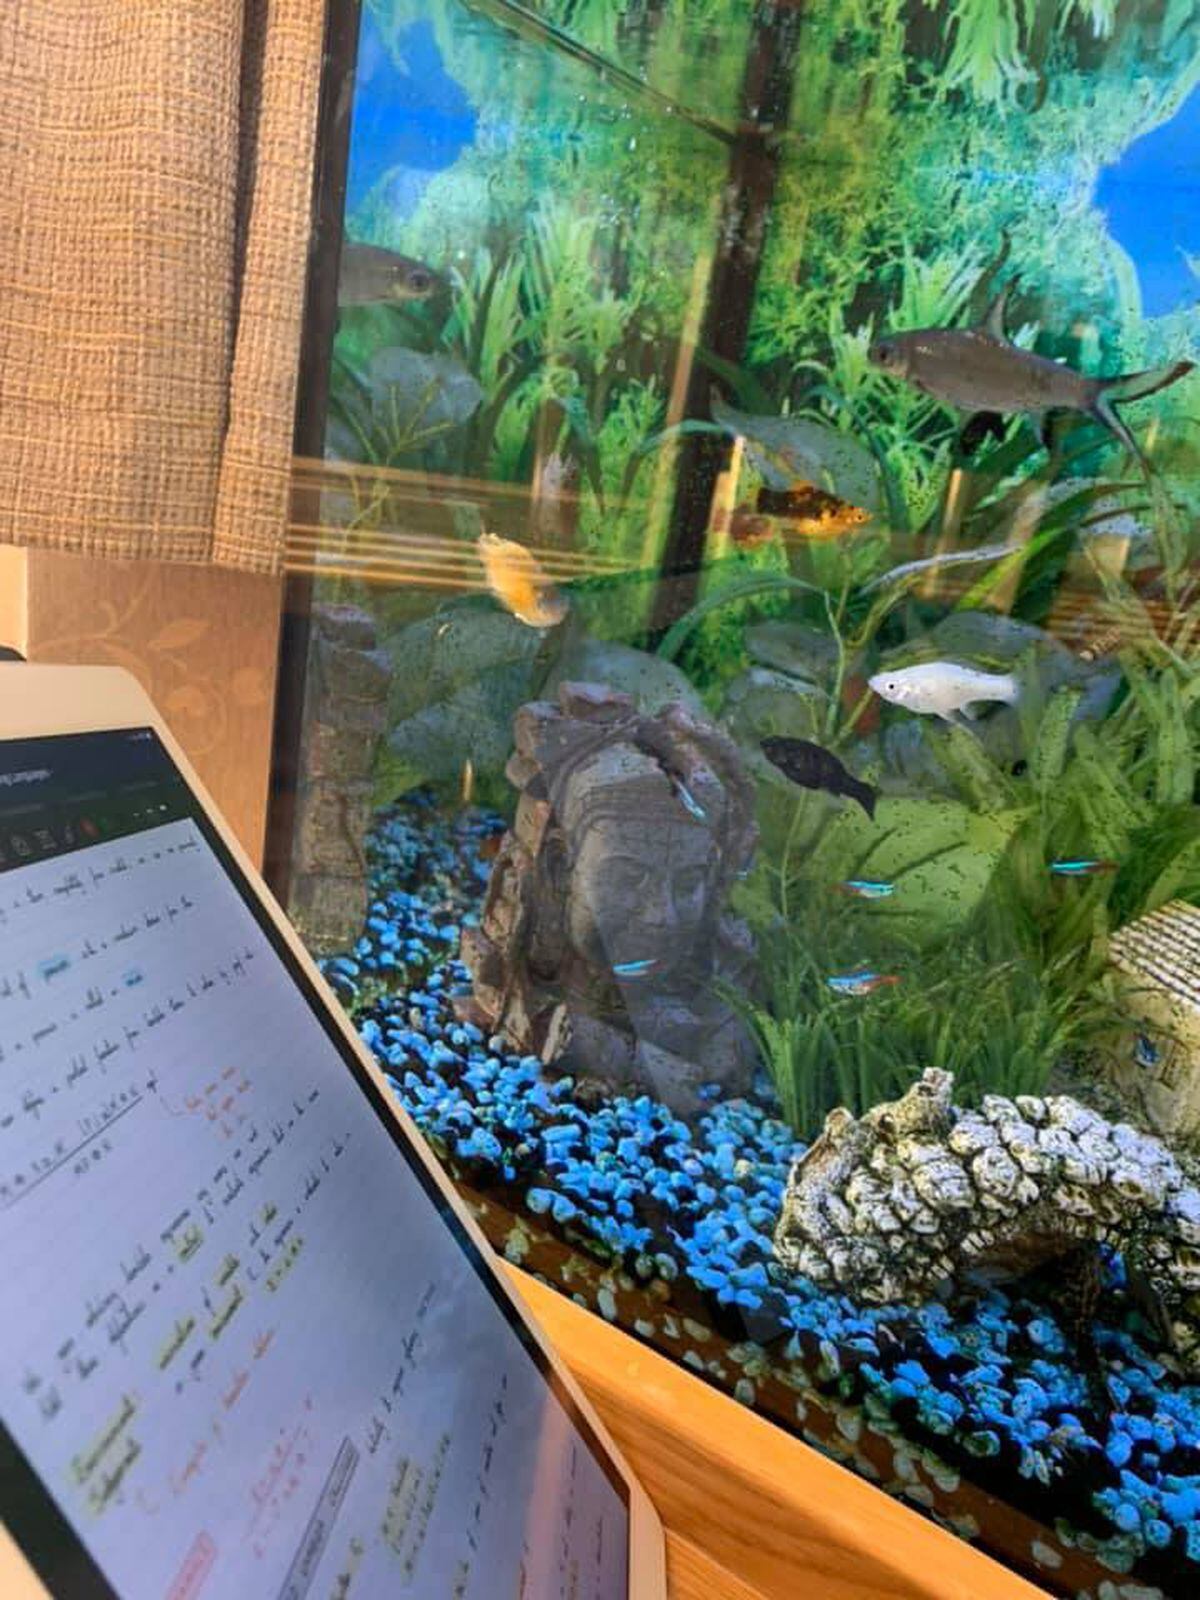 A tank of fish with owner Fiona Stanley, Wolverhampton, doing some maths coursework